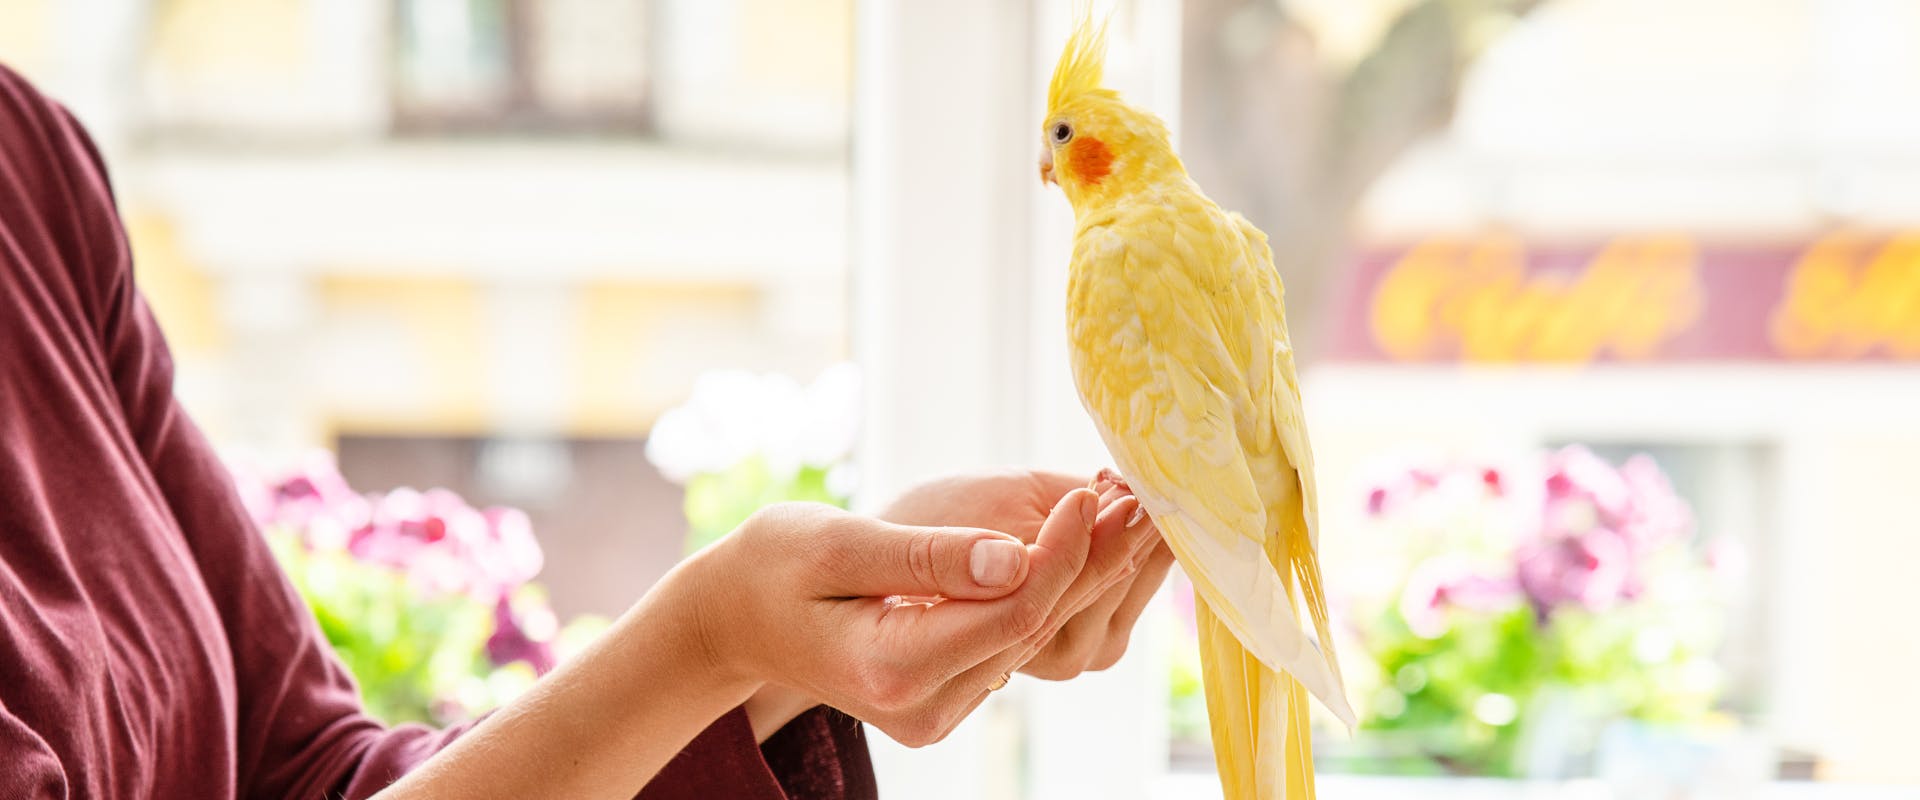 a cockatiel perched on the cupped hands of a woman next to a window